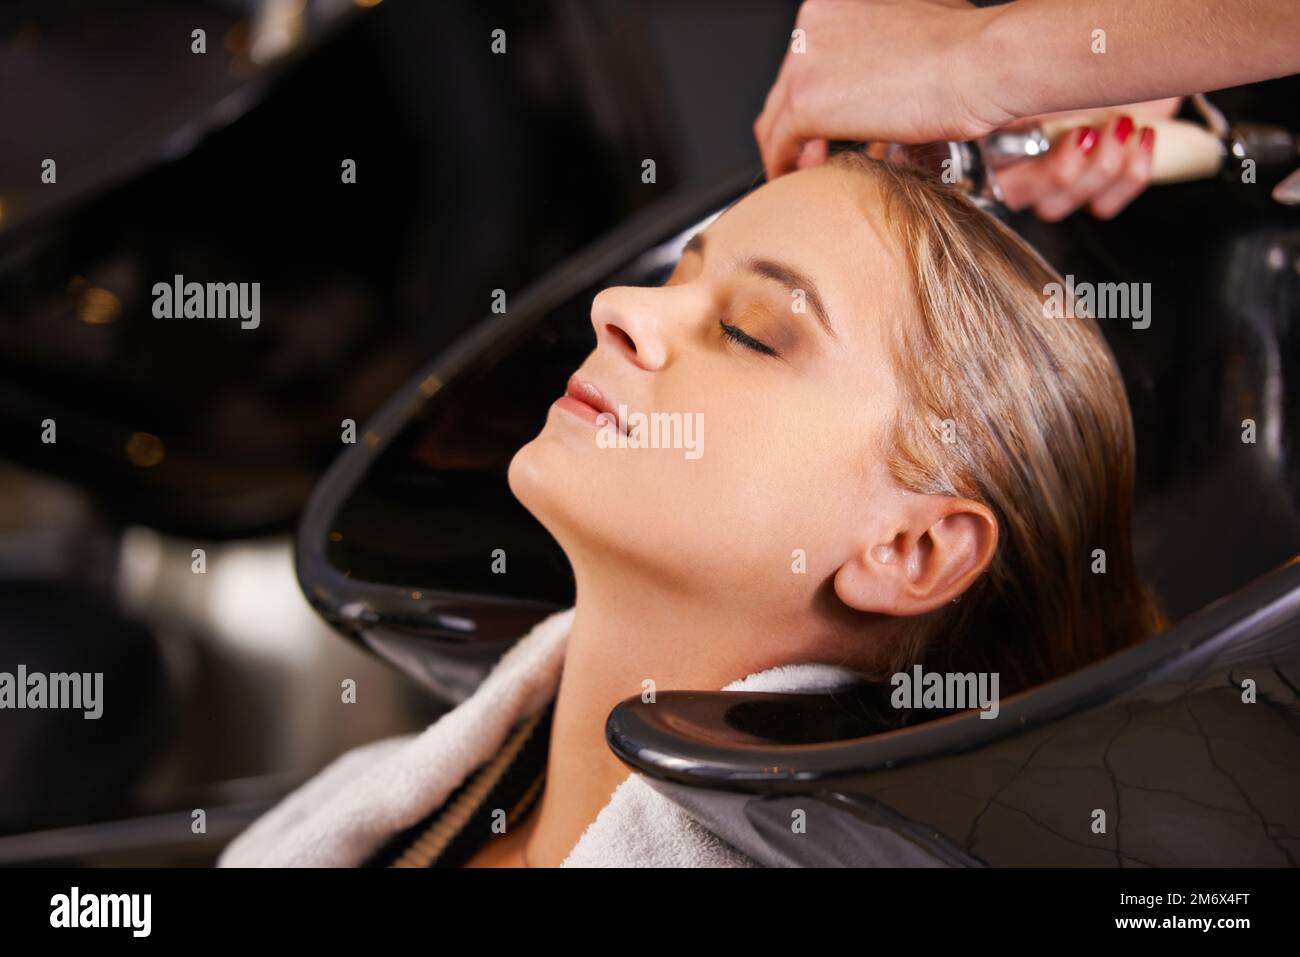 Feels so good...a young woman having her hair washed at a hair salon. Stock Photo